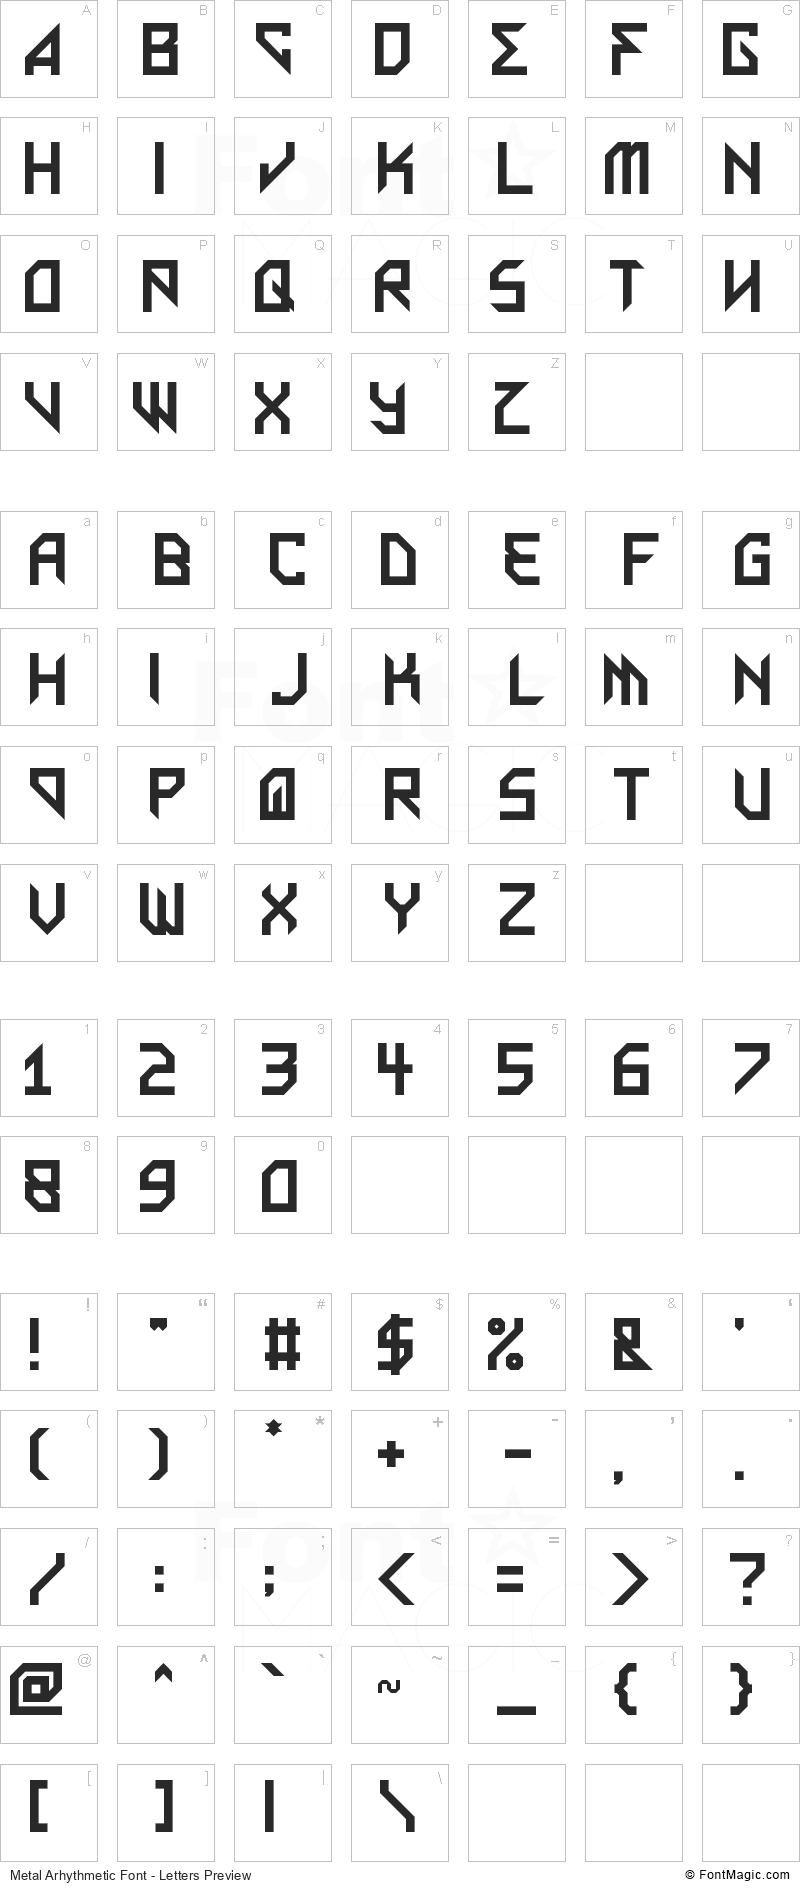 Metal Arhythmetic Font - All Latters Preview Chart